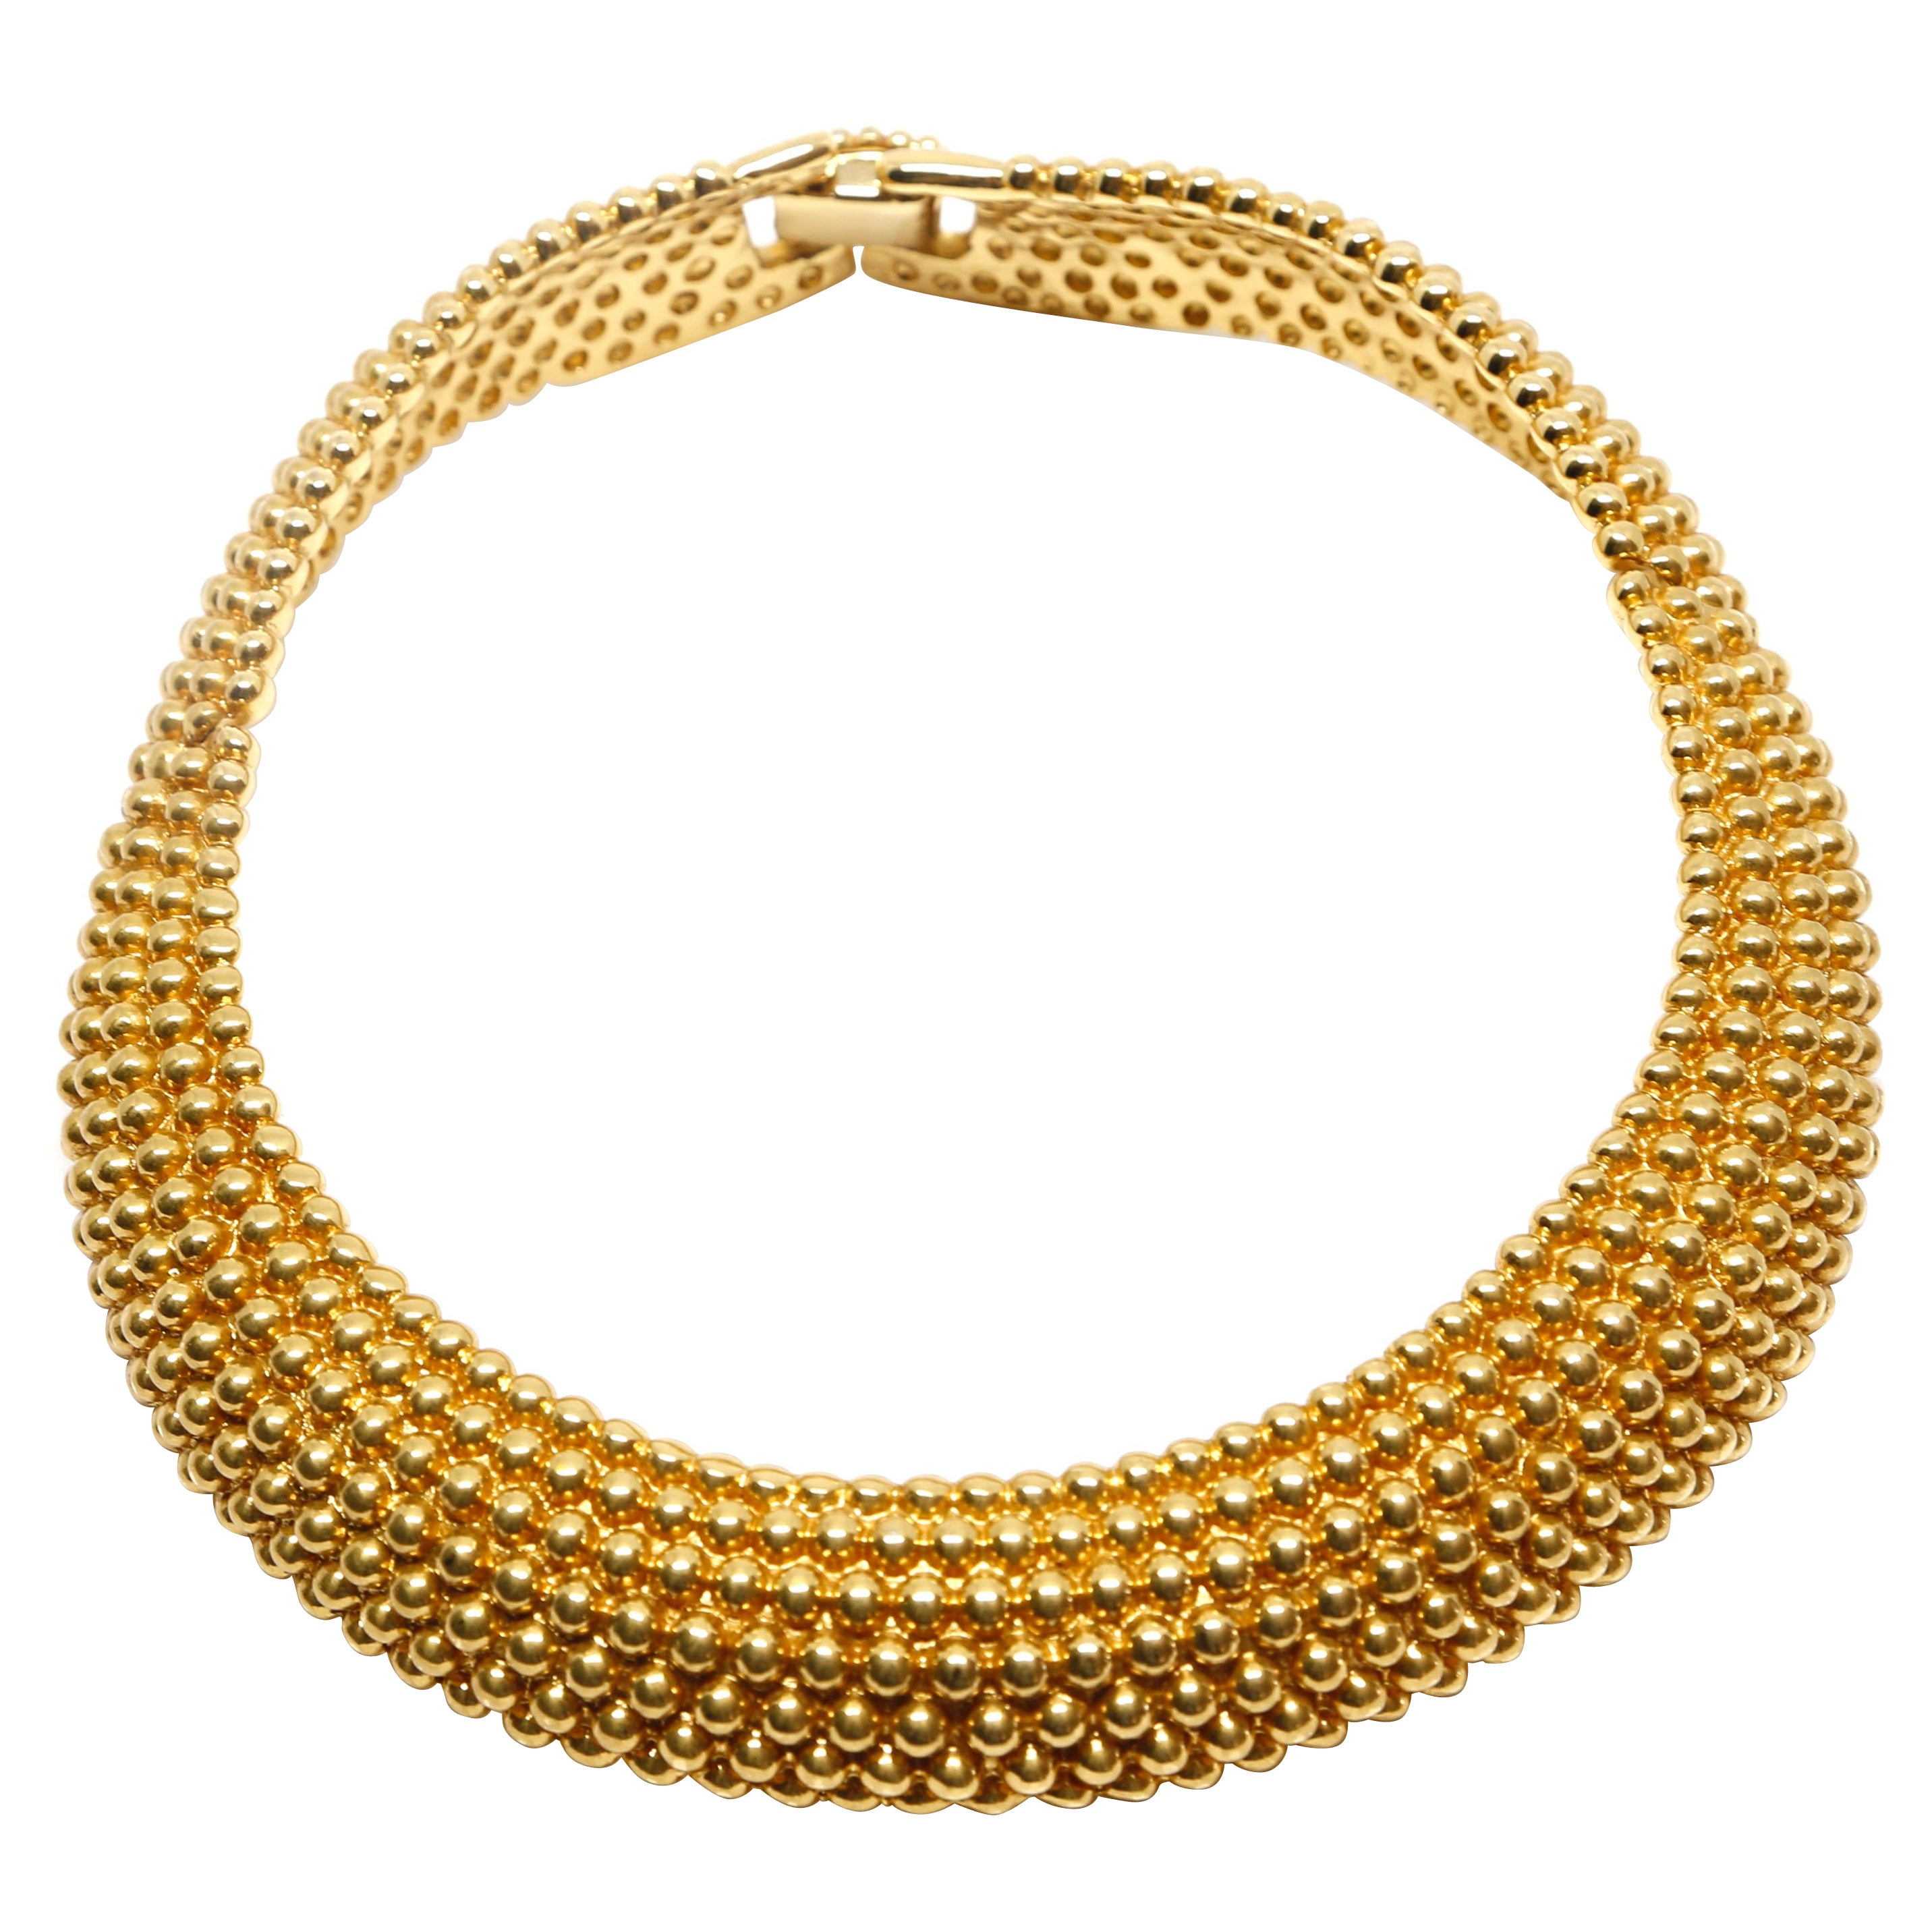 1980's Yves Saint Laurent 'beaded' Gilt Collar Necklace with Hinges